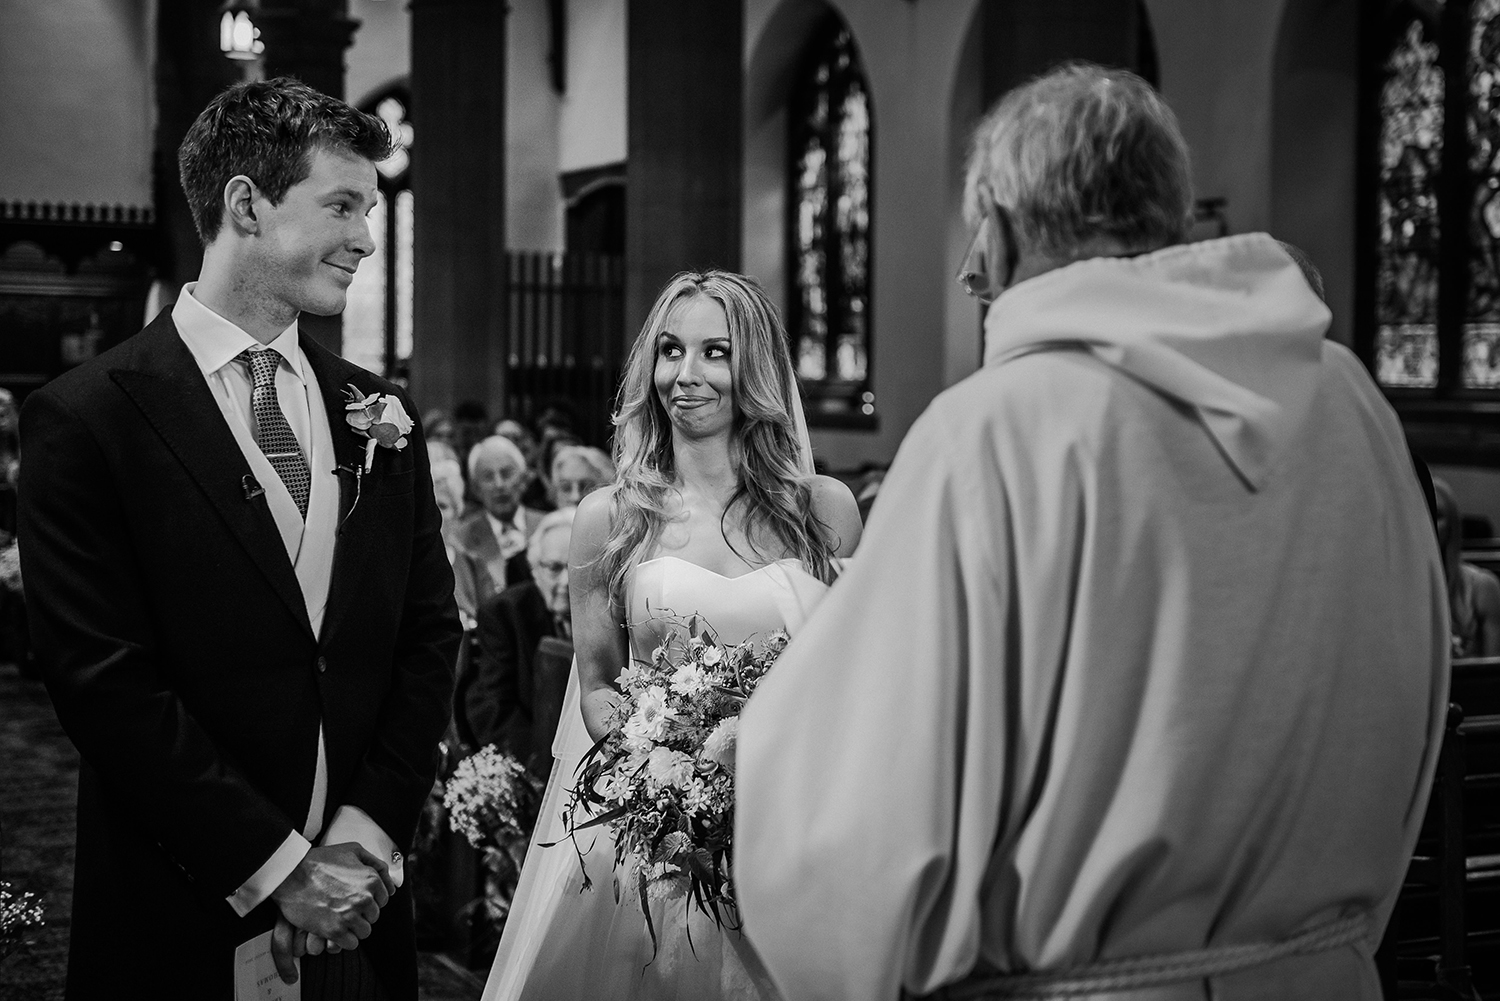  BW photo of bride and groom pulling funny faces at each other 